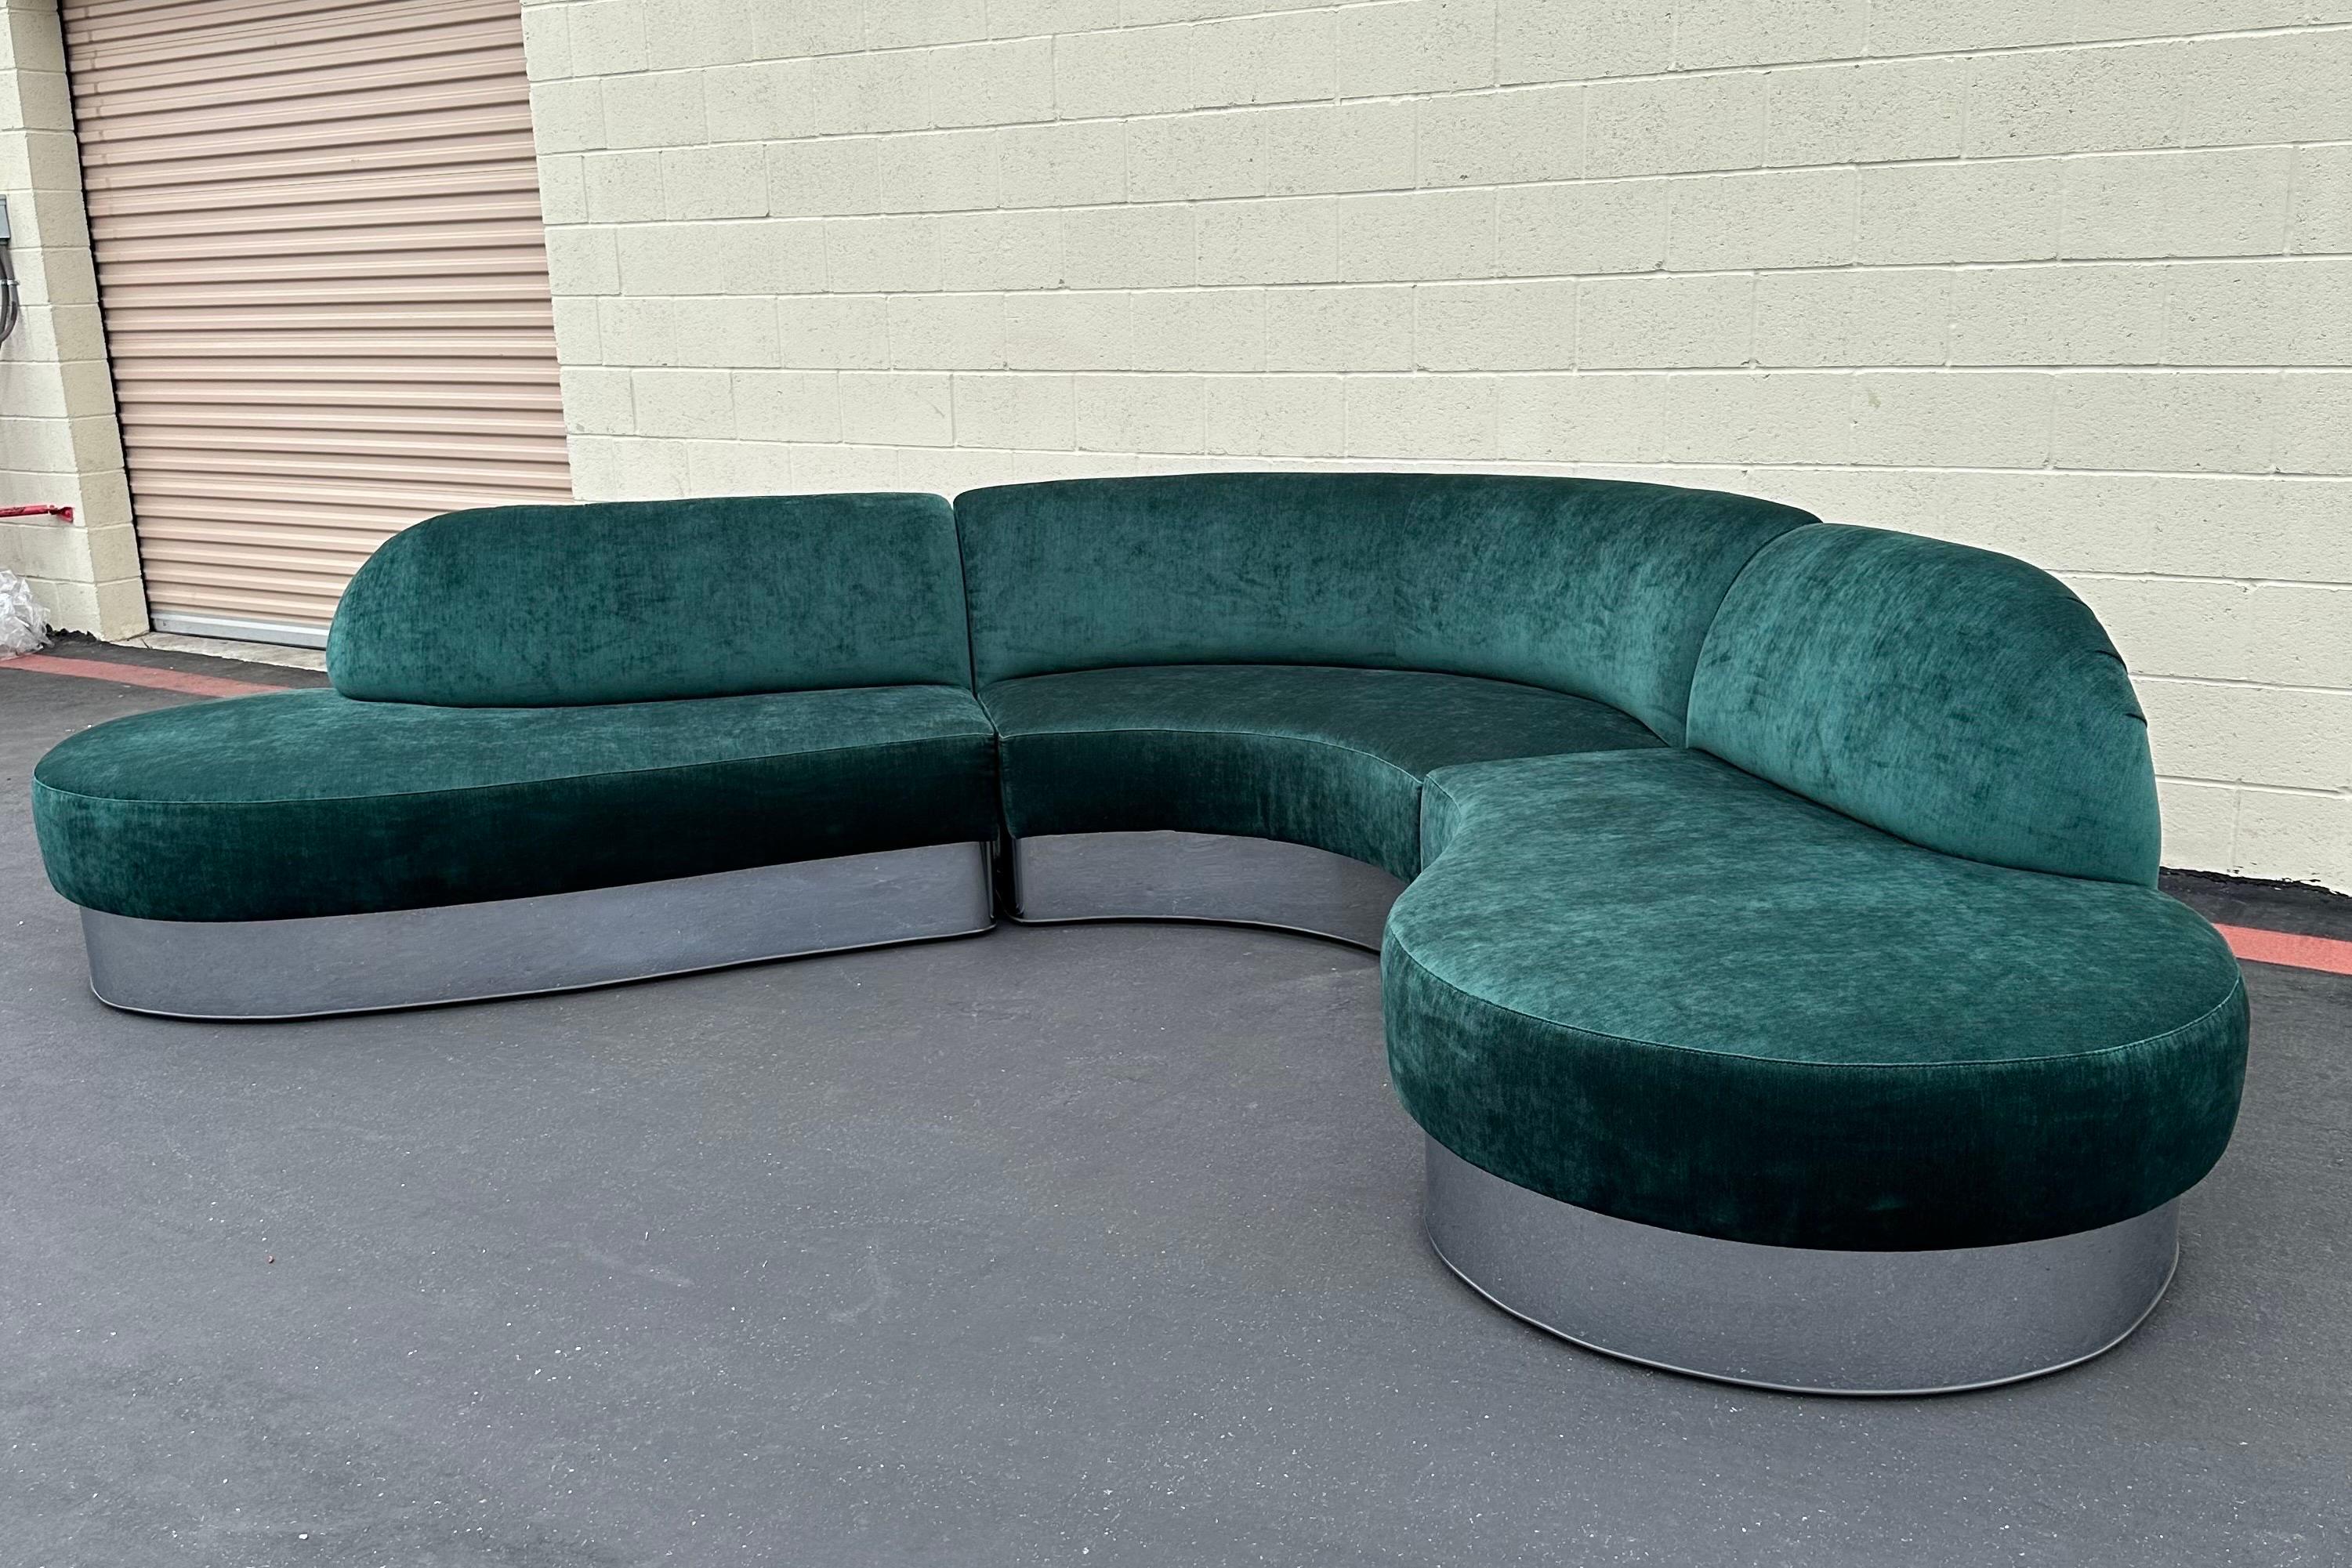 Vintage Milo Baughman Serpentine Three Pieces Sectional Sofa for Thayer Coggin In Good Condition For Sale In North Hollywood, CA